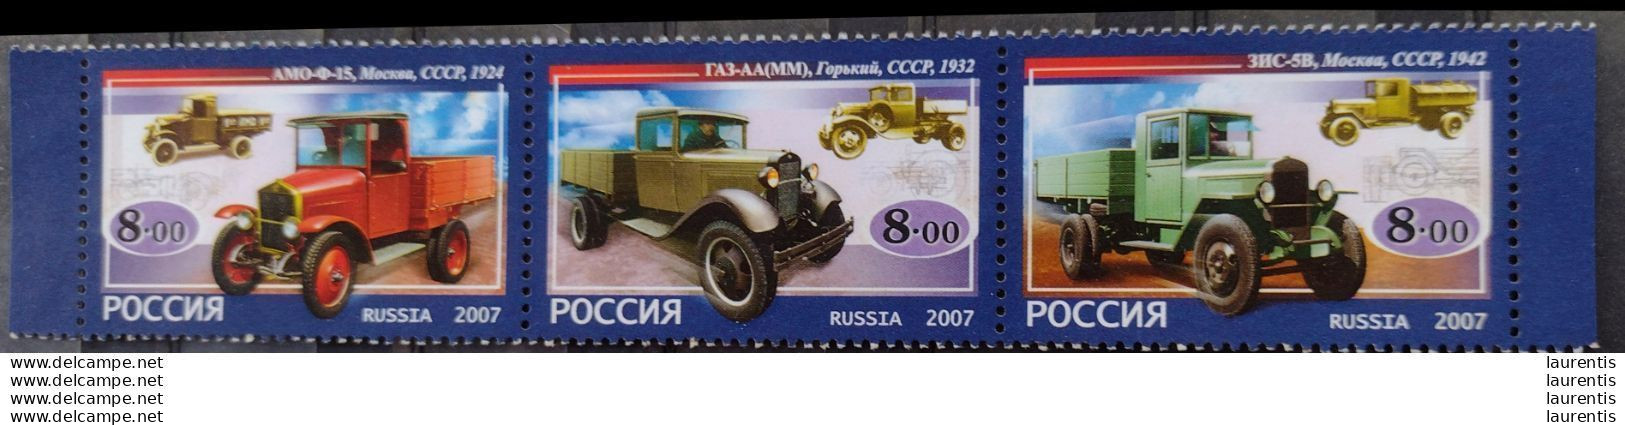 D7467. Trucks - Camions - Russia Yv 7016-18 MNH - 0,95 (3) - Camion